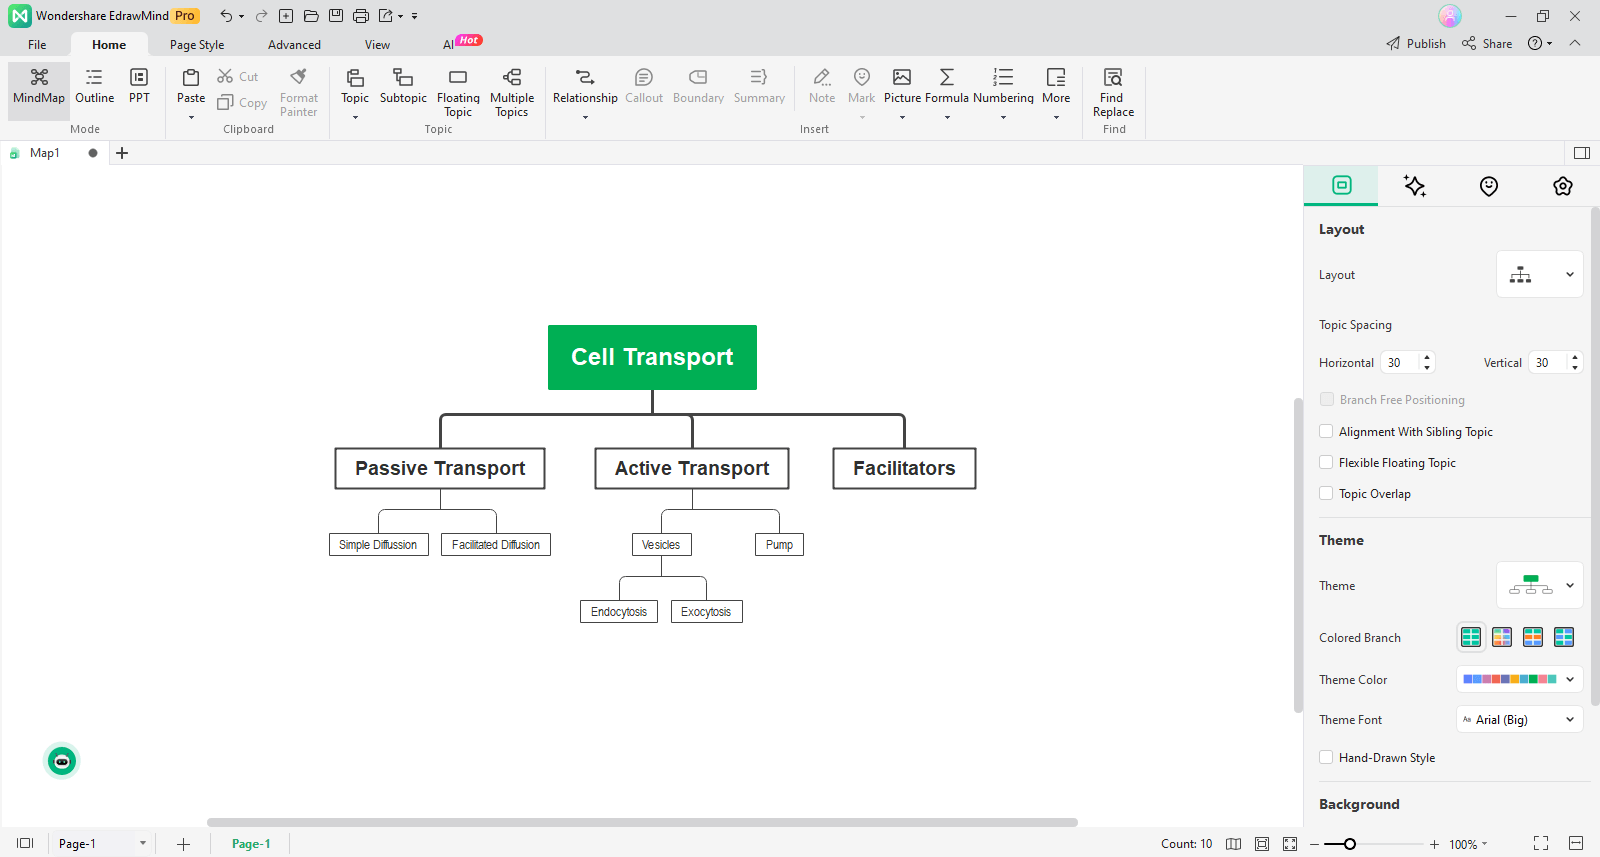 enter the information into your concept map